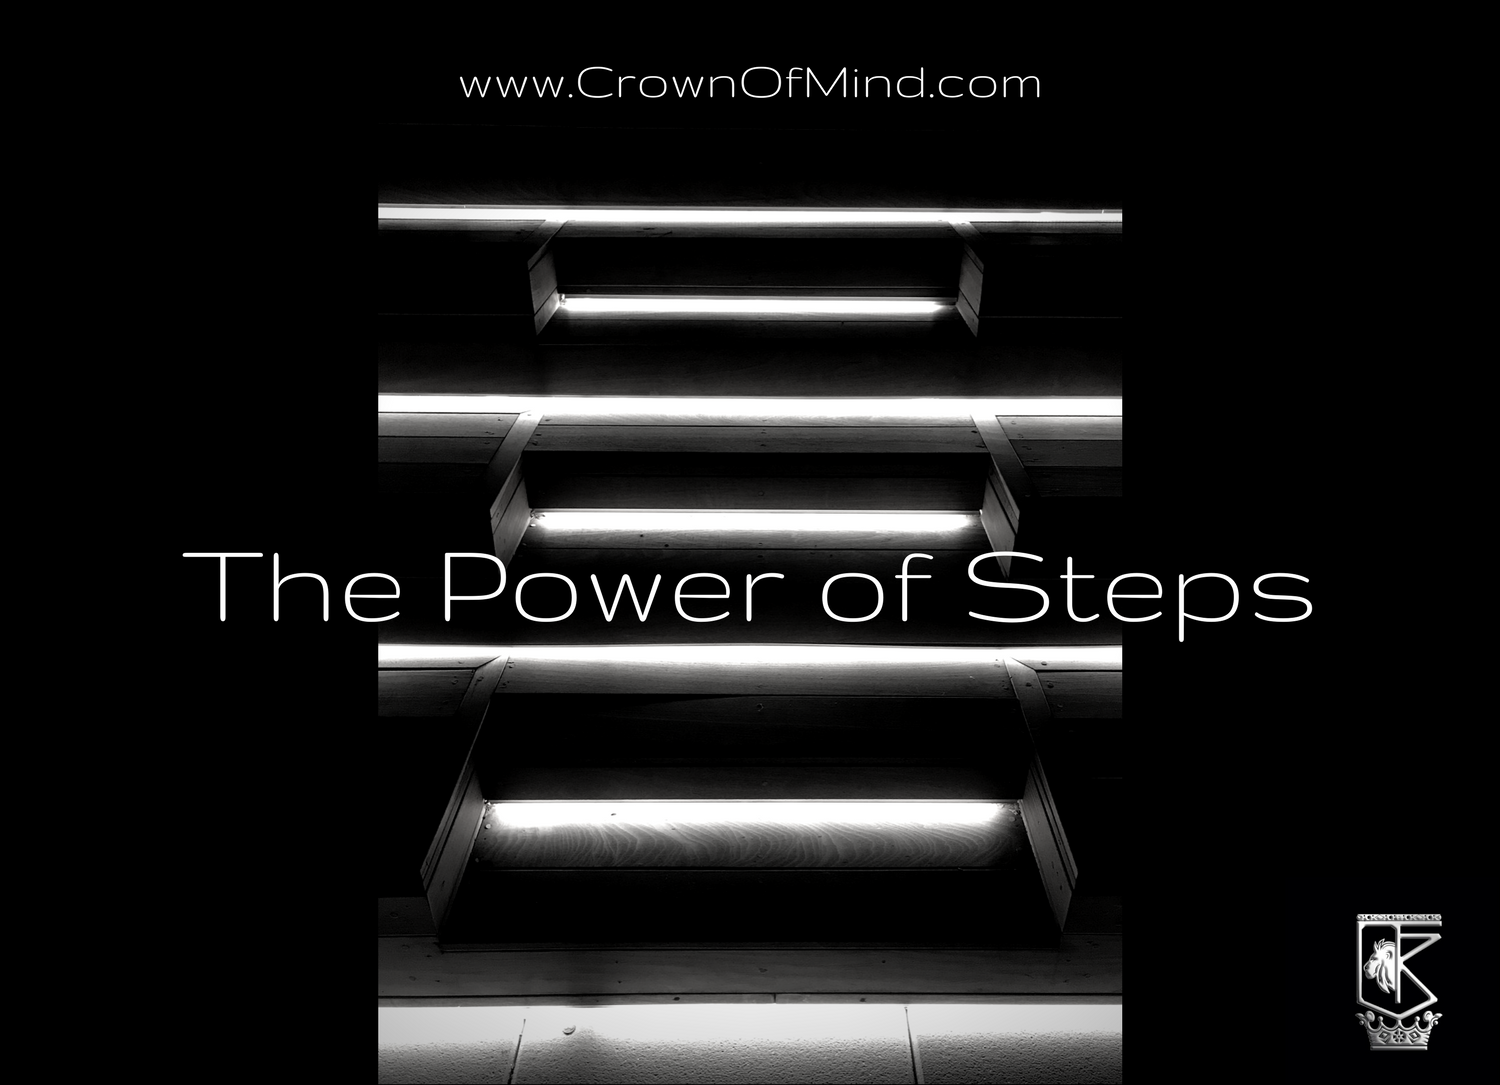 The Power of Steps